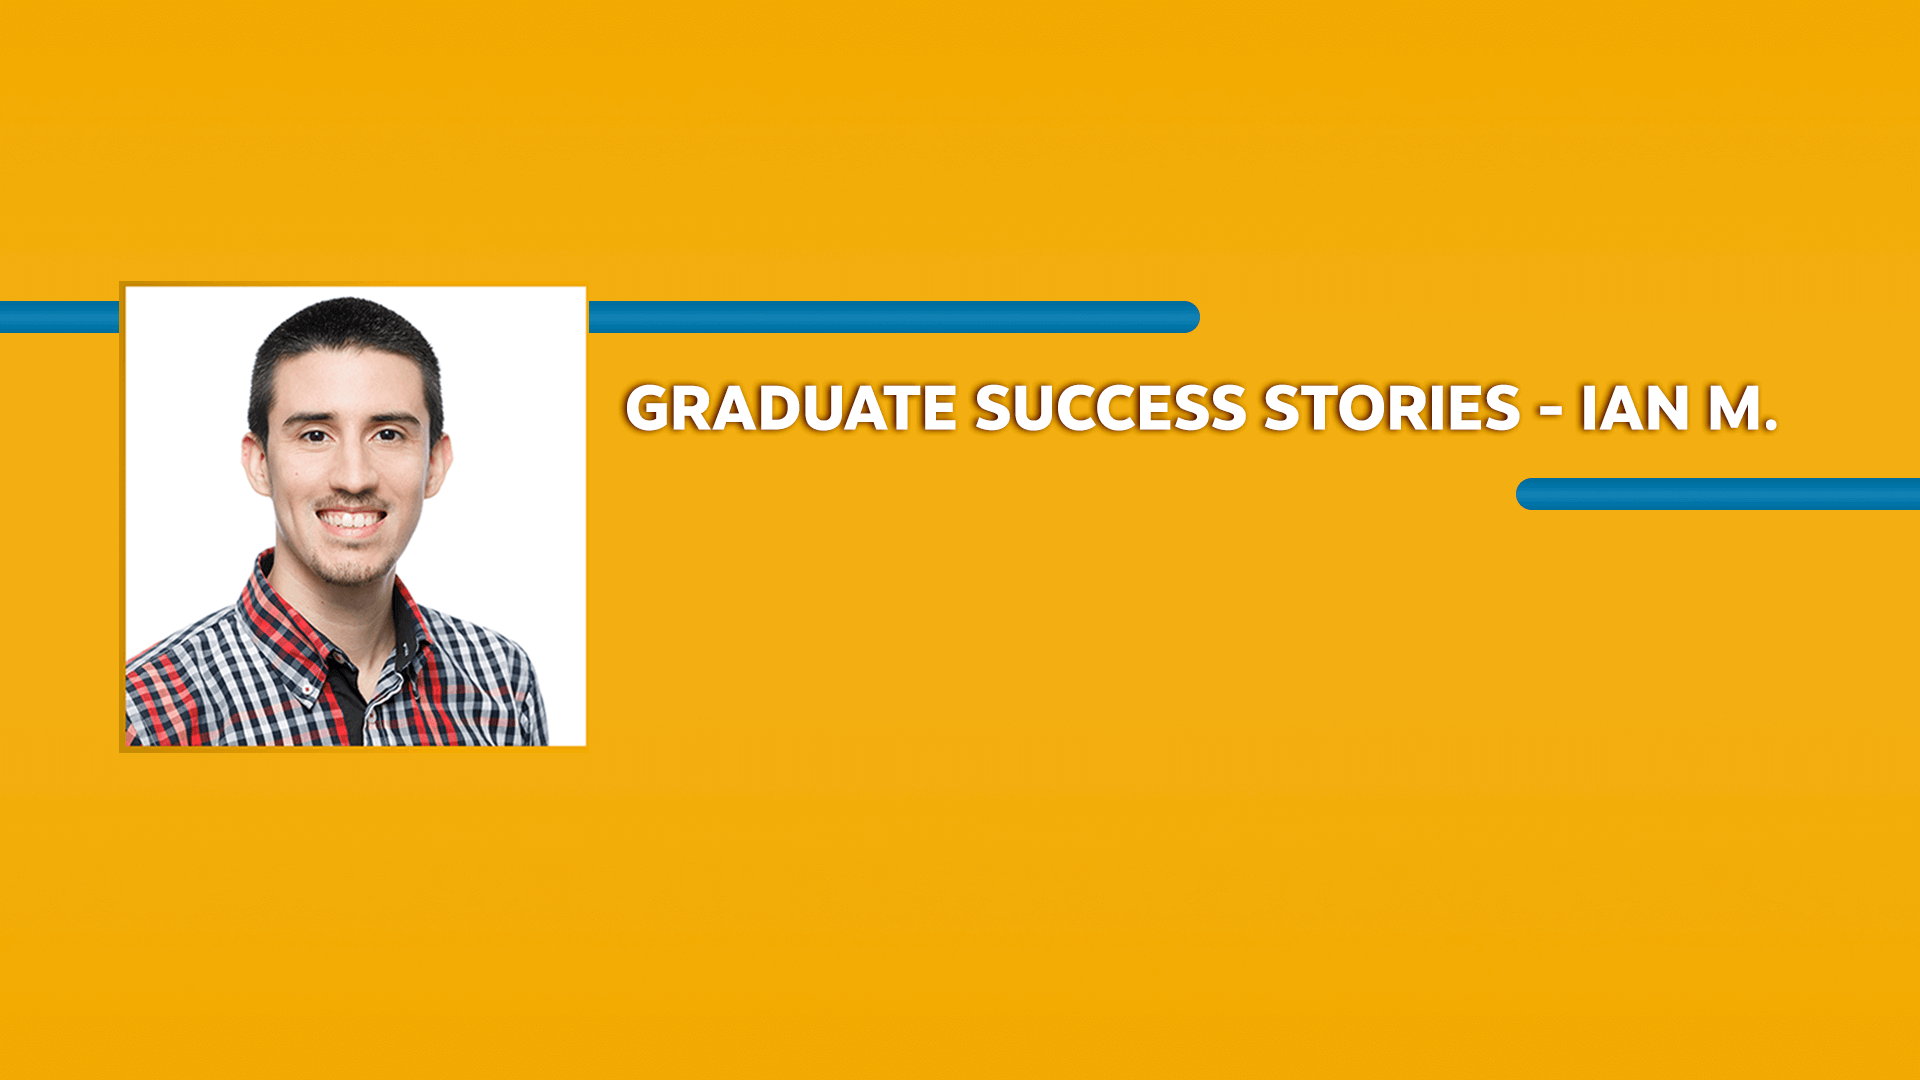 Orange rectangle with a picture of a man wearing a shirt and Graduate Success Stories - Ian M. text in white font